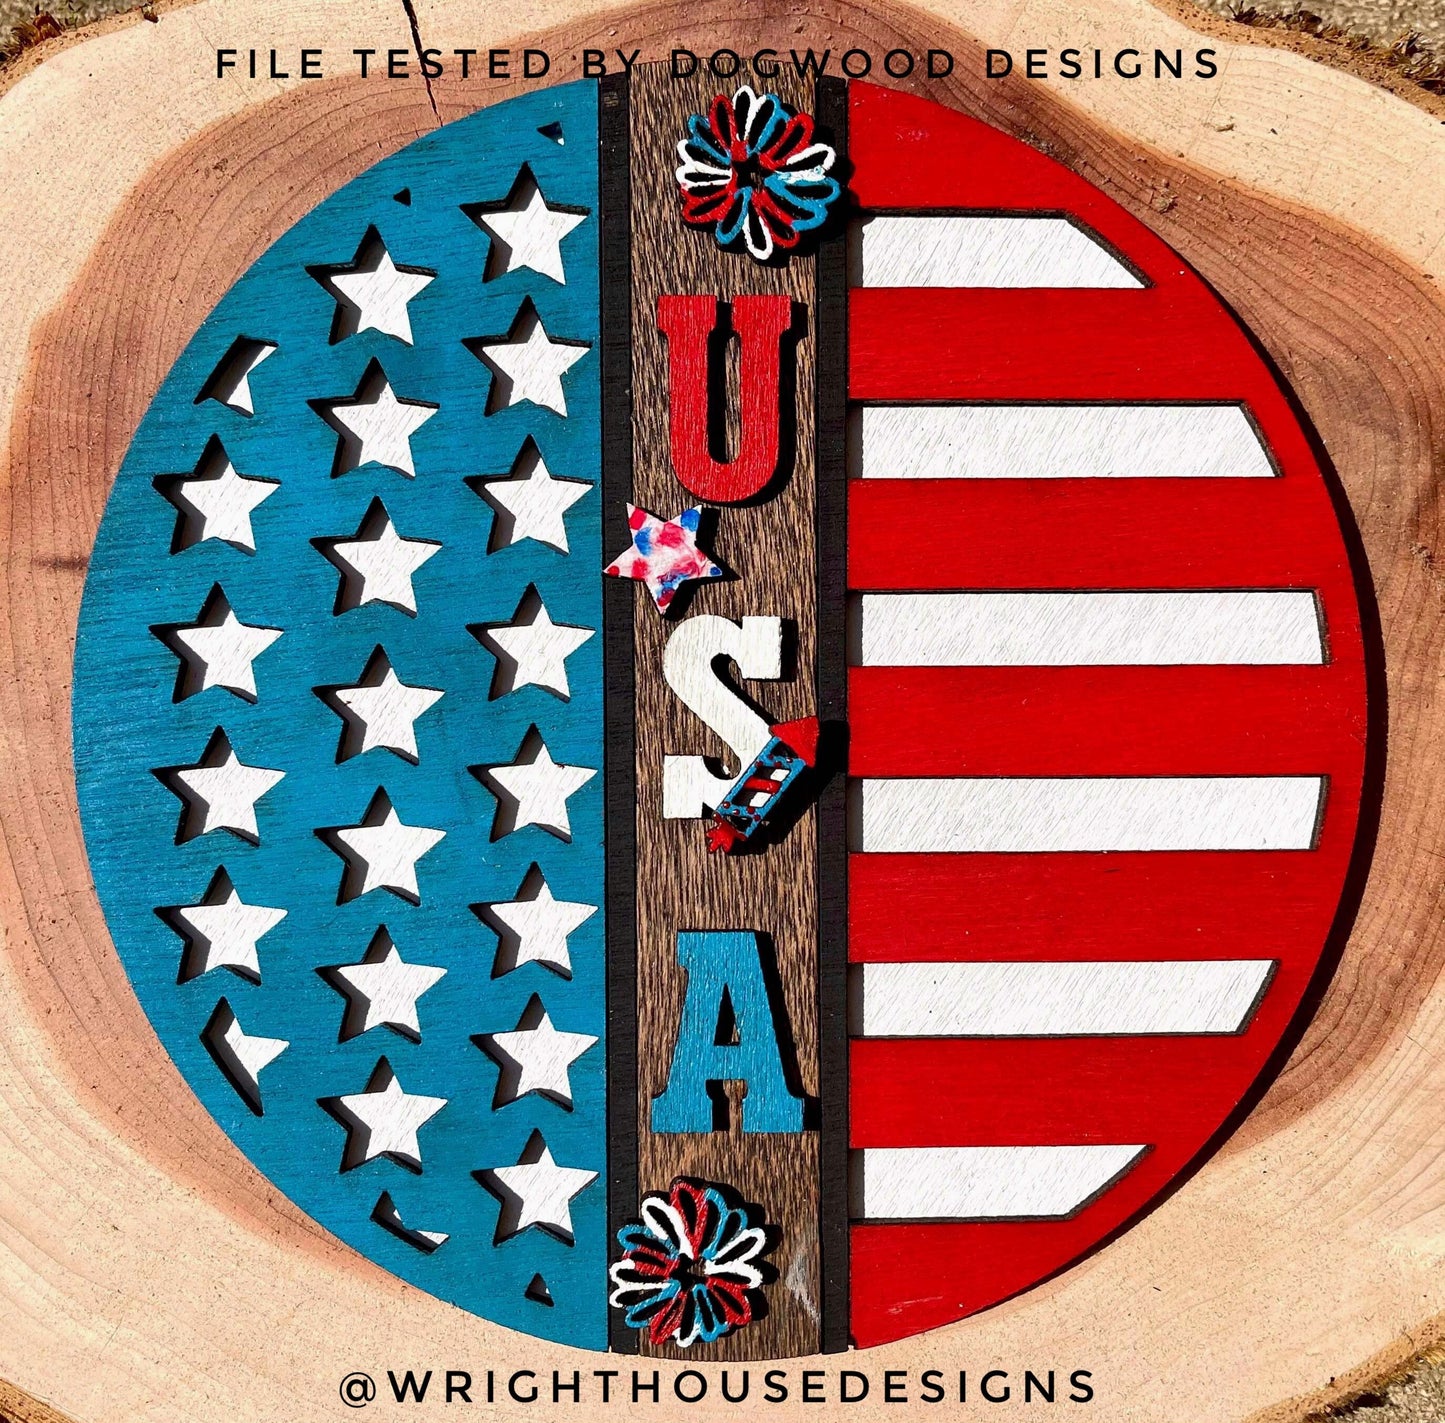 DIGITAL FILE - Interchangeable American Flag - Horizontal and Vertical Round Sign - Files for Sign Making - SVG Cut File For Glowforge